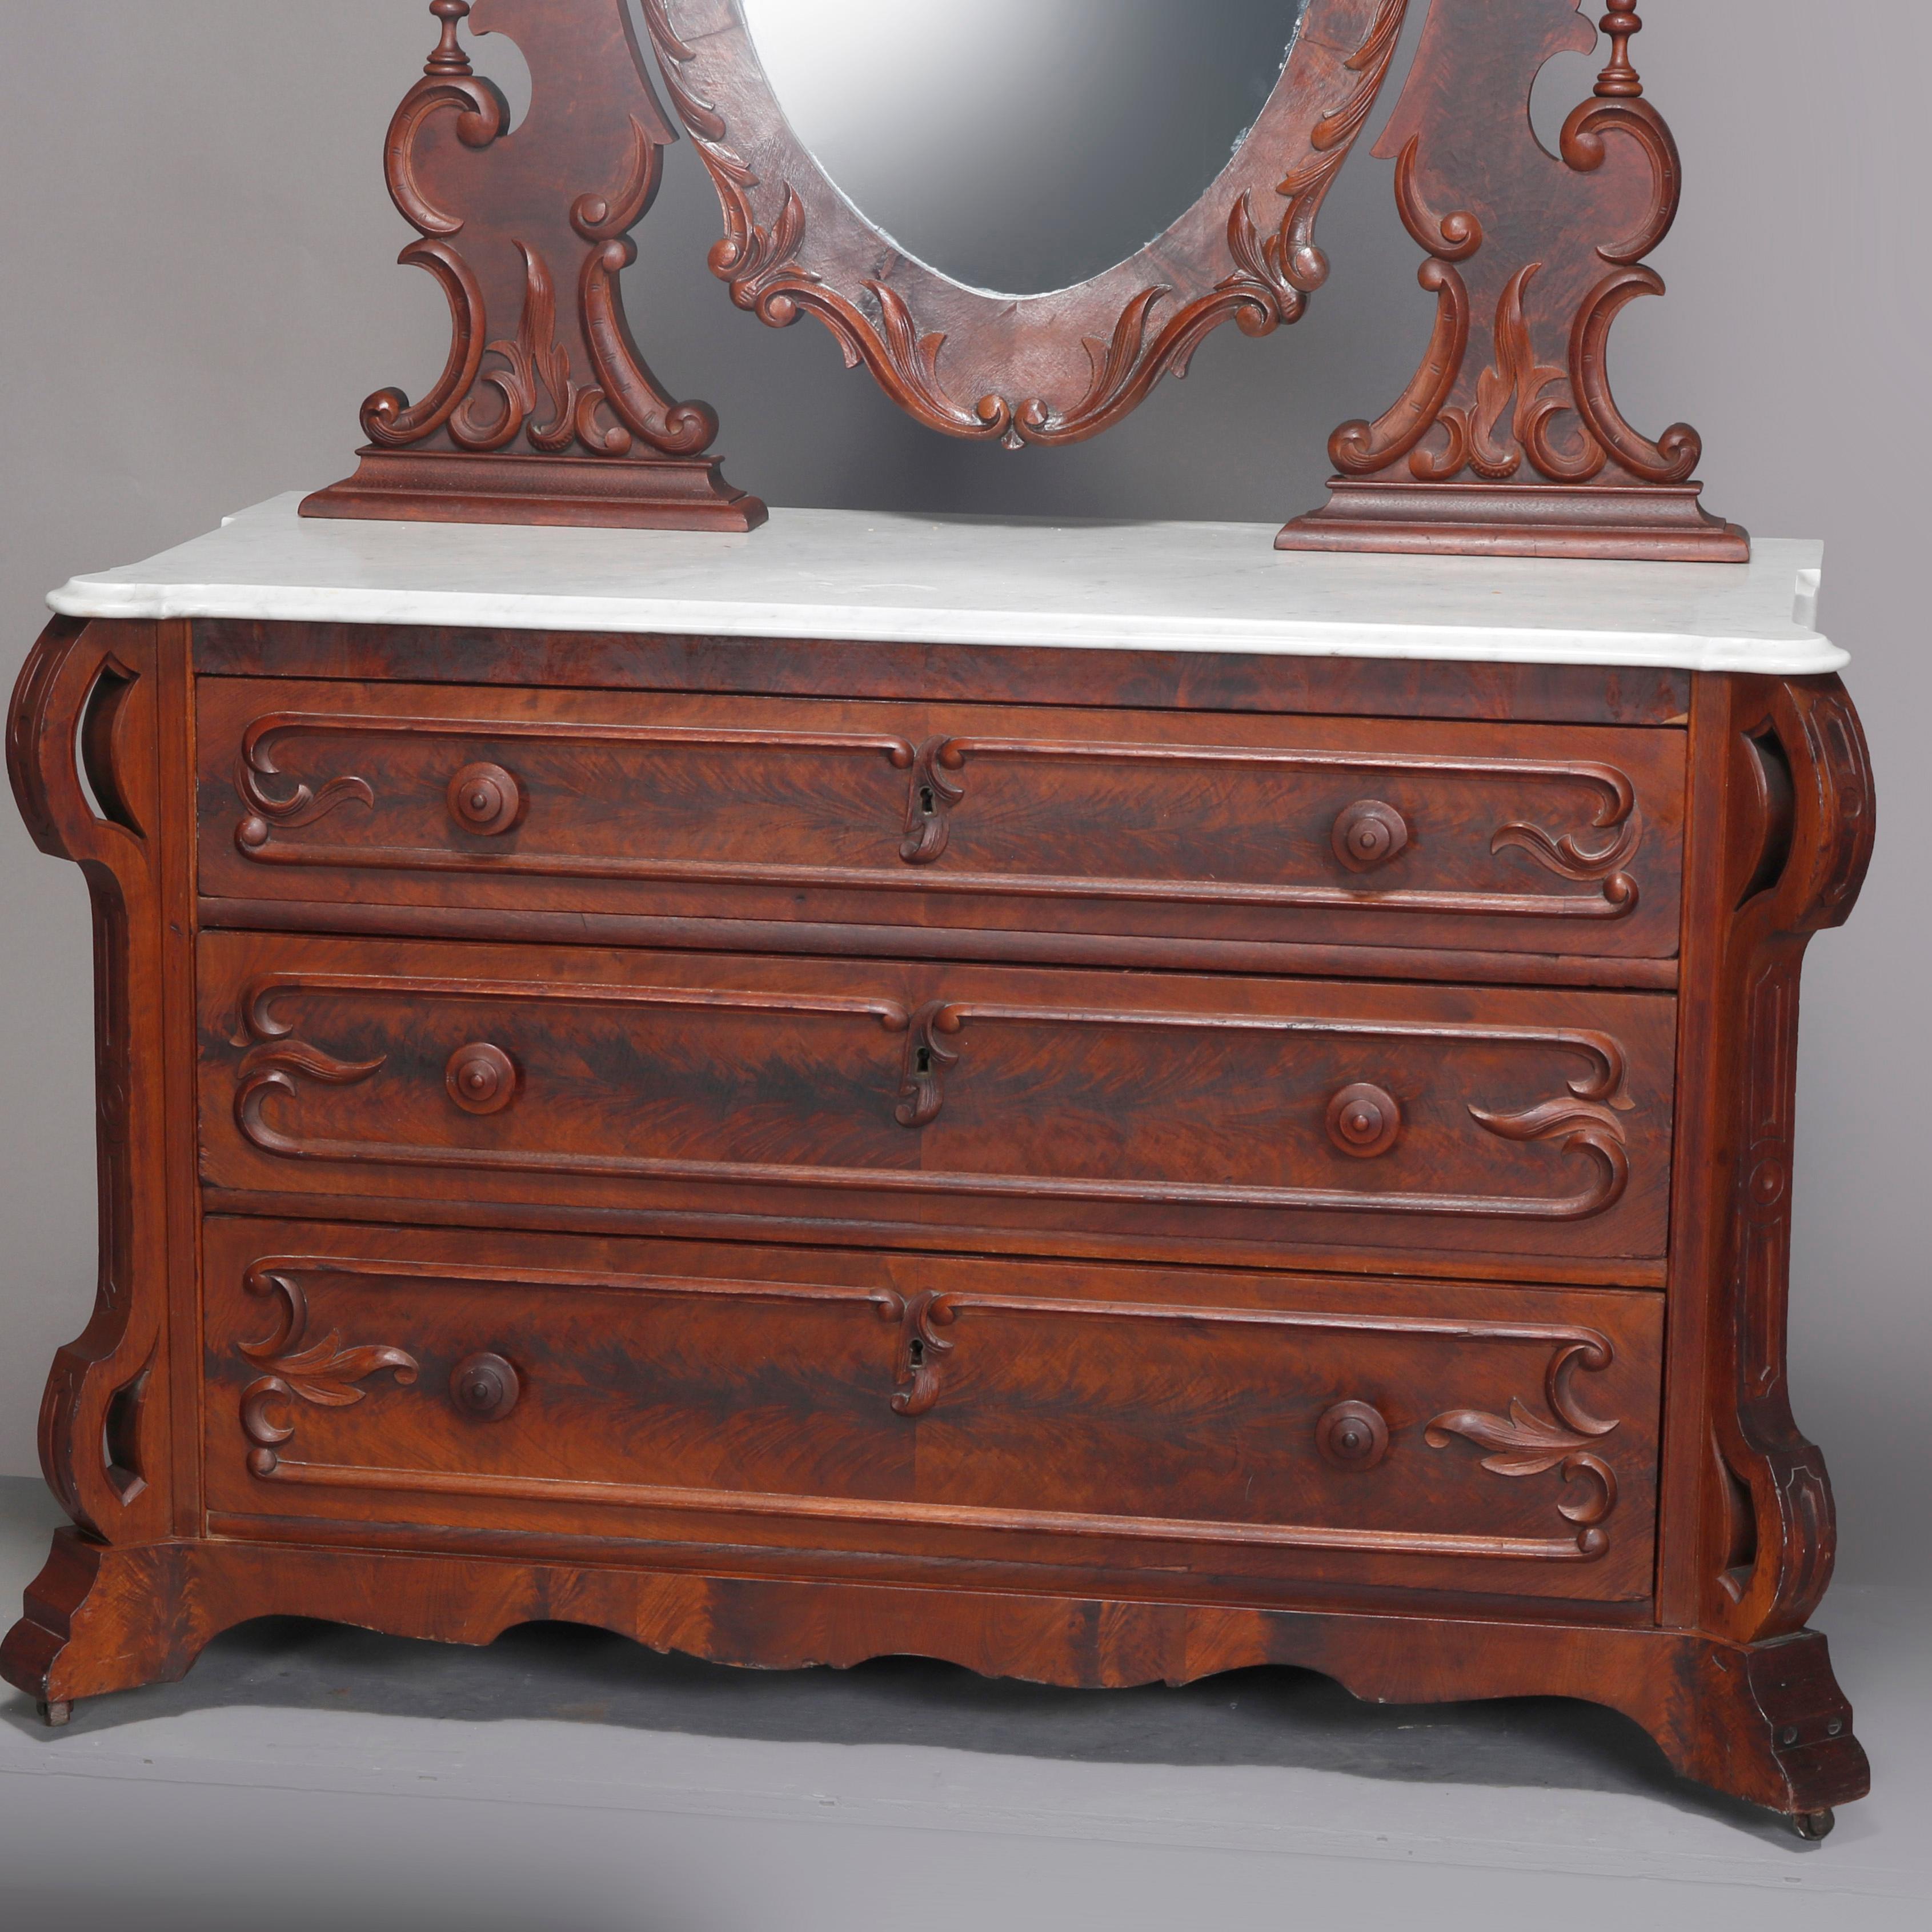 American Antique Renaissance Revival Flame Mahogany and Marble Dresser, circa 1880 For Sale